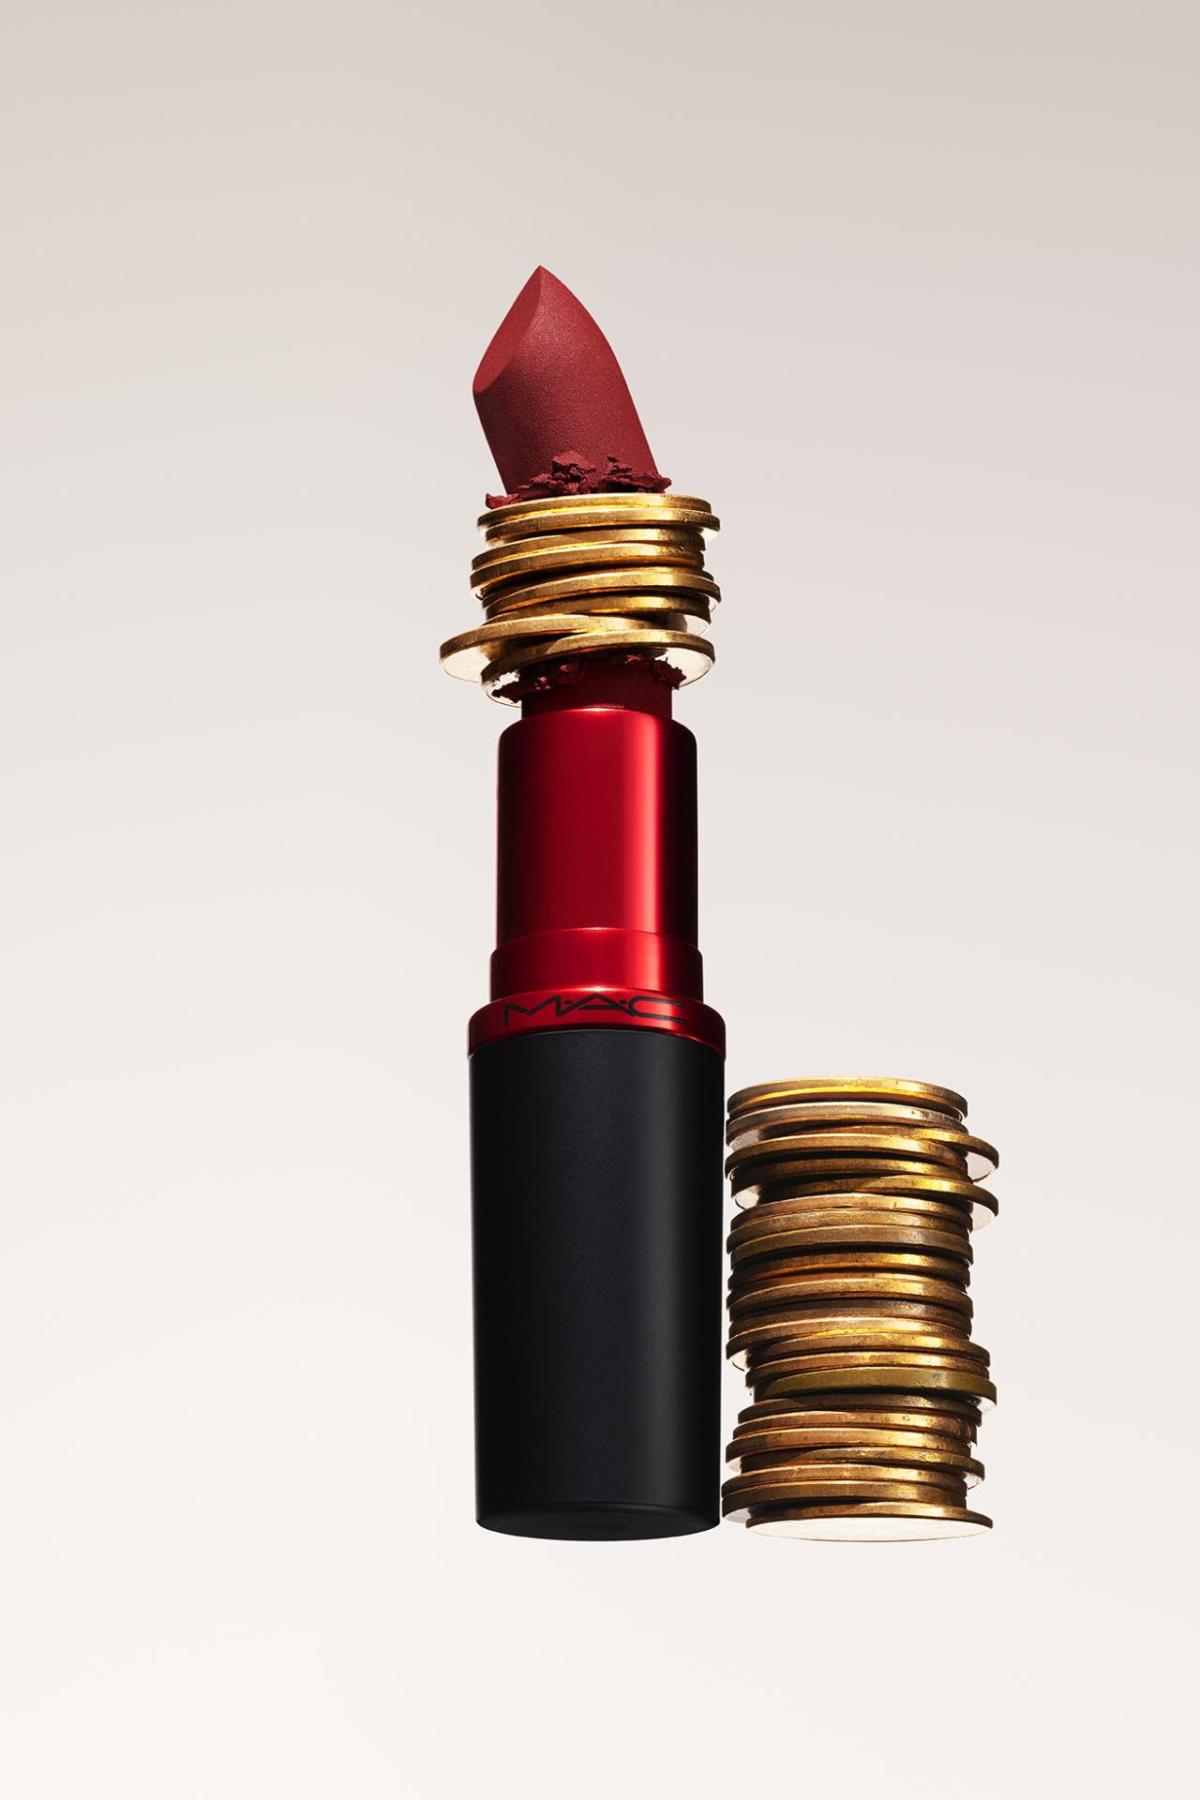 A lipstick with stacked coins in the middle of it and to the side.